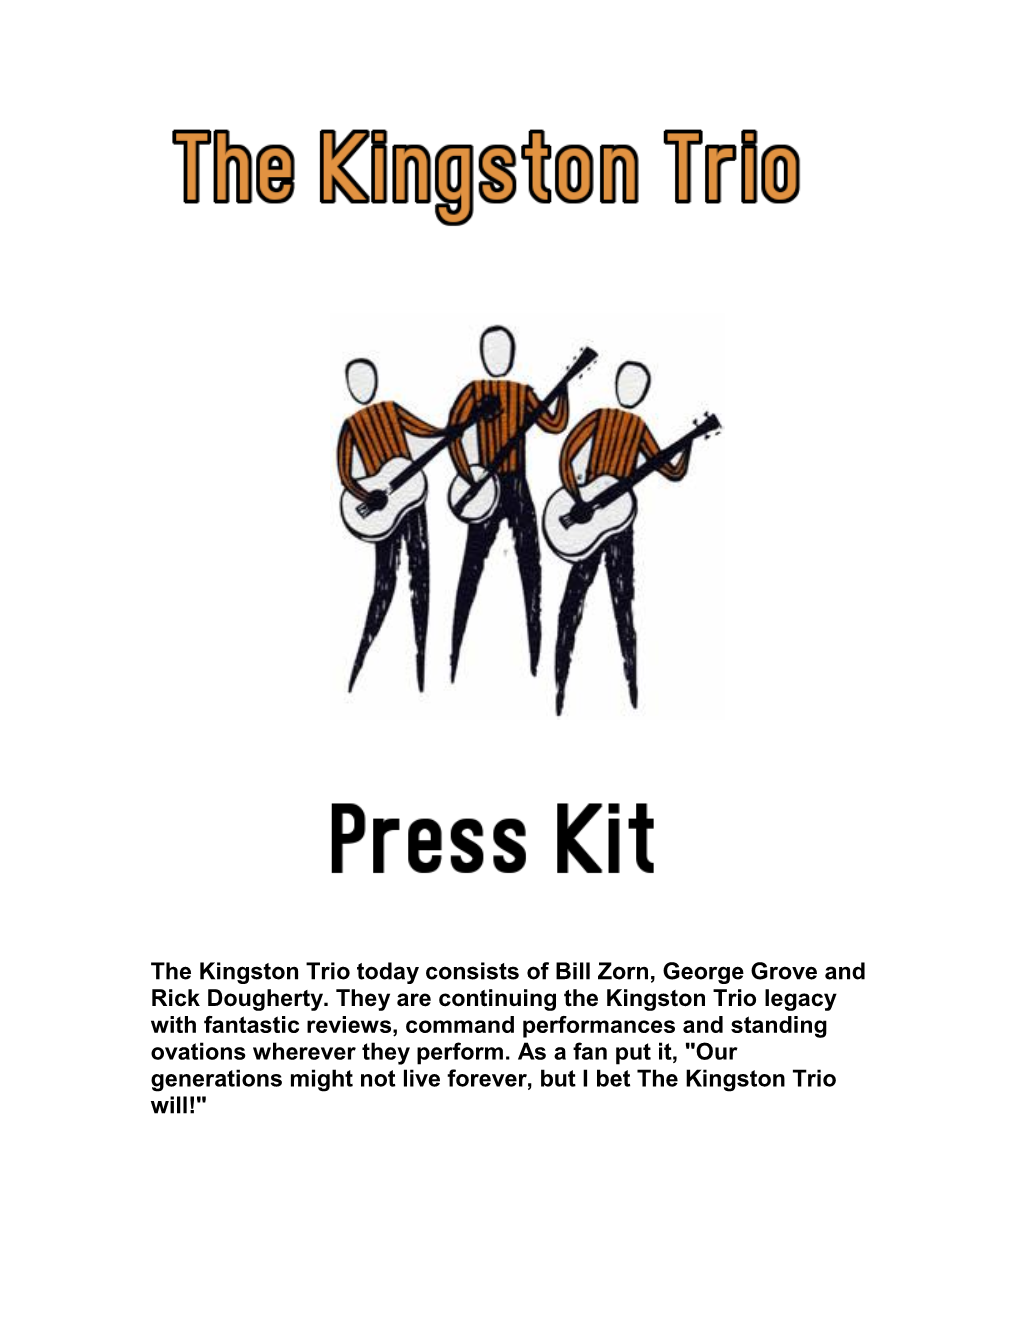 The Kingston Trio Today Consists of Bill Zorn, George Grove and Rick Dougherty. They Are Continuing the Kingston Trio Legacy